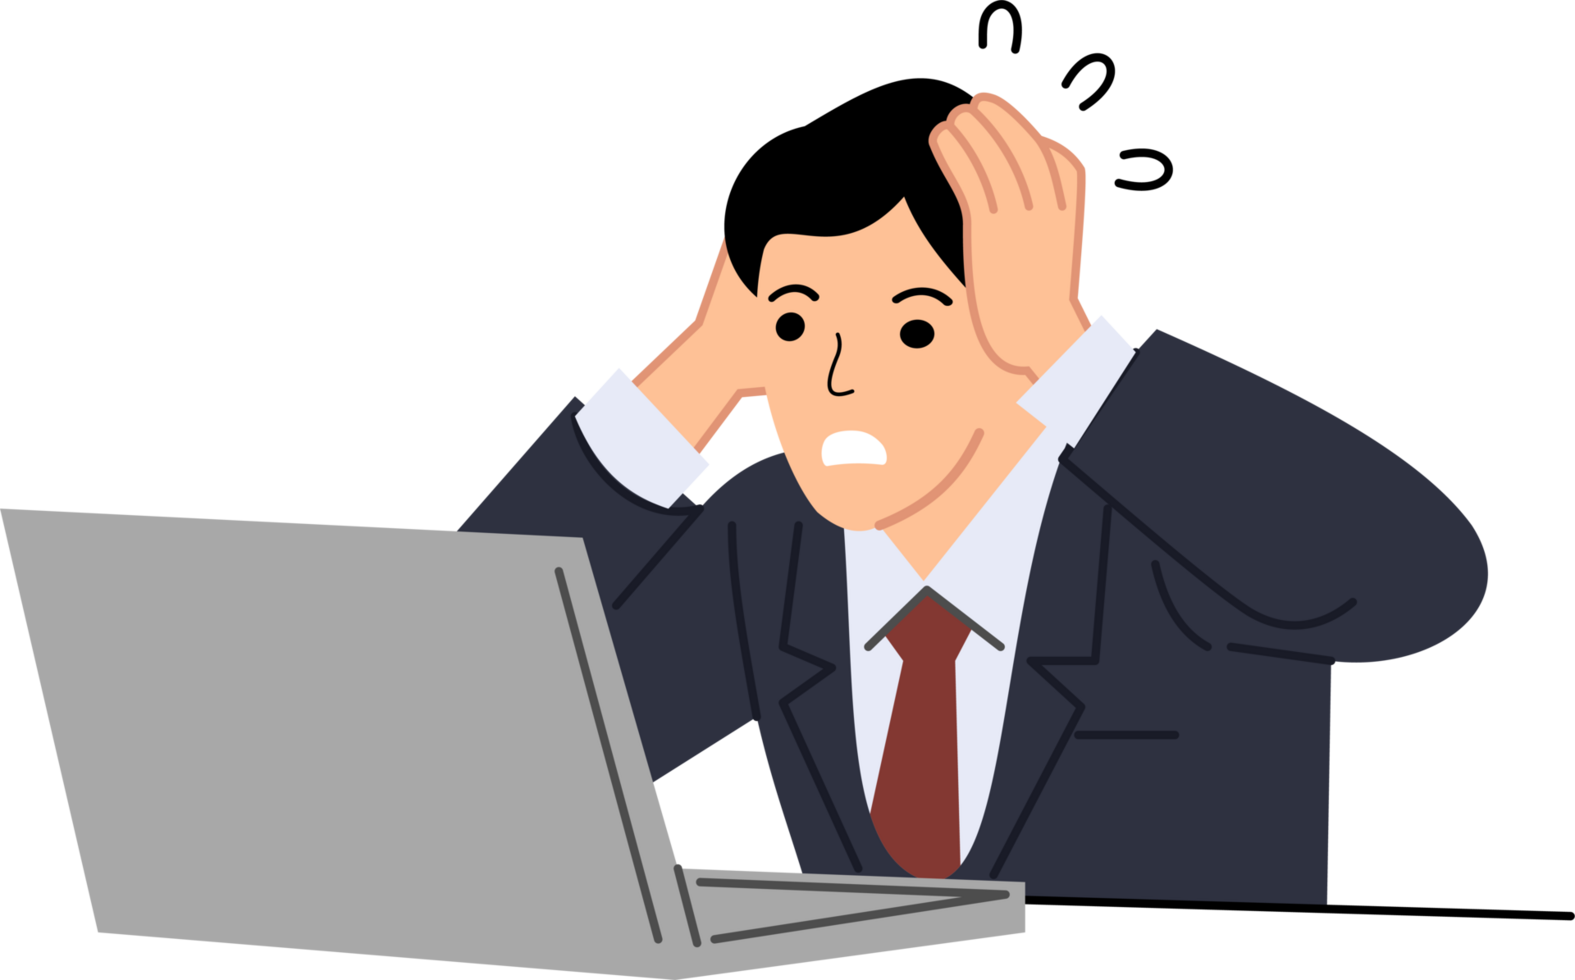 A employee holds his head while looking at a laptop or Tired worker png